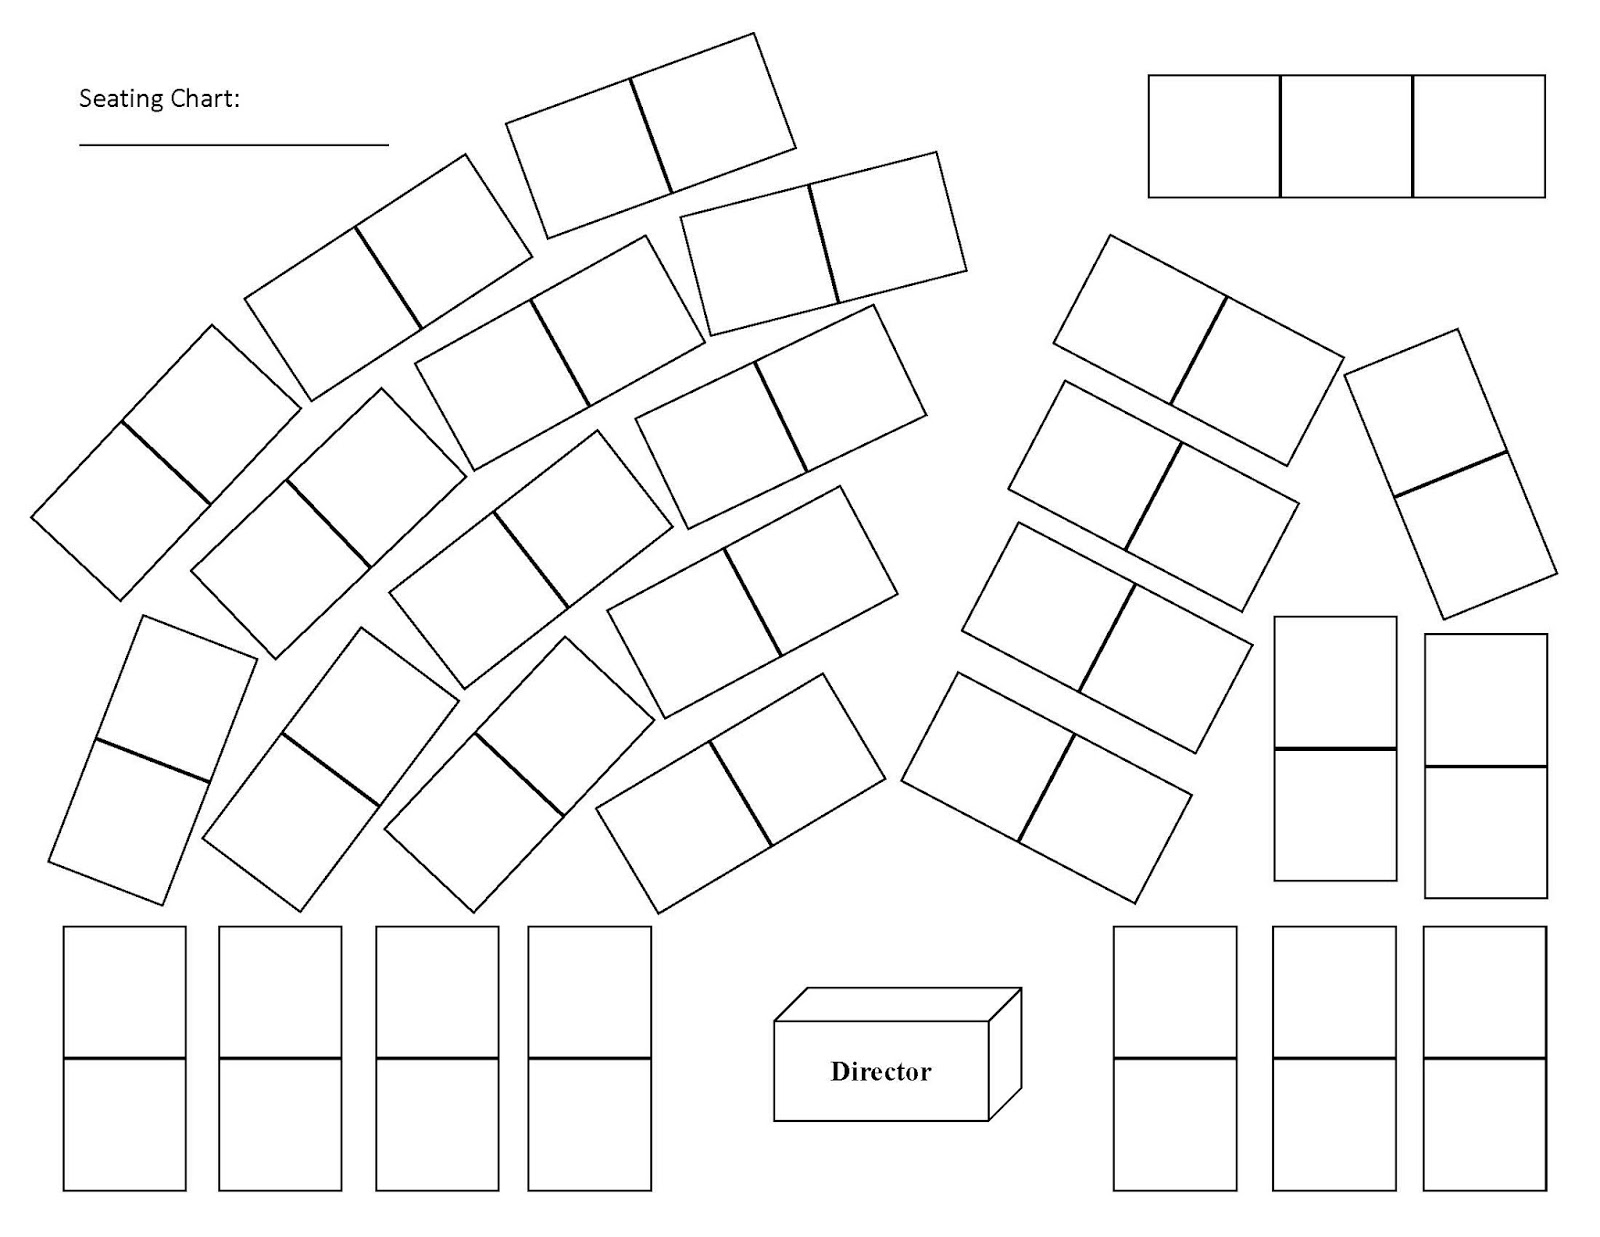 Orchestra Classroom: Seating Chart, anyone?